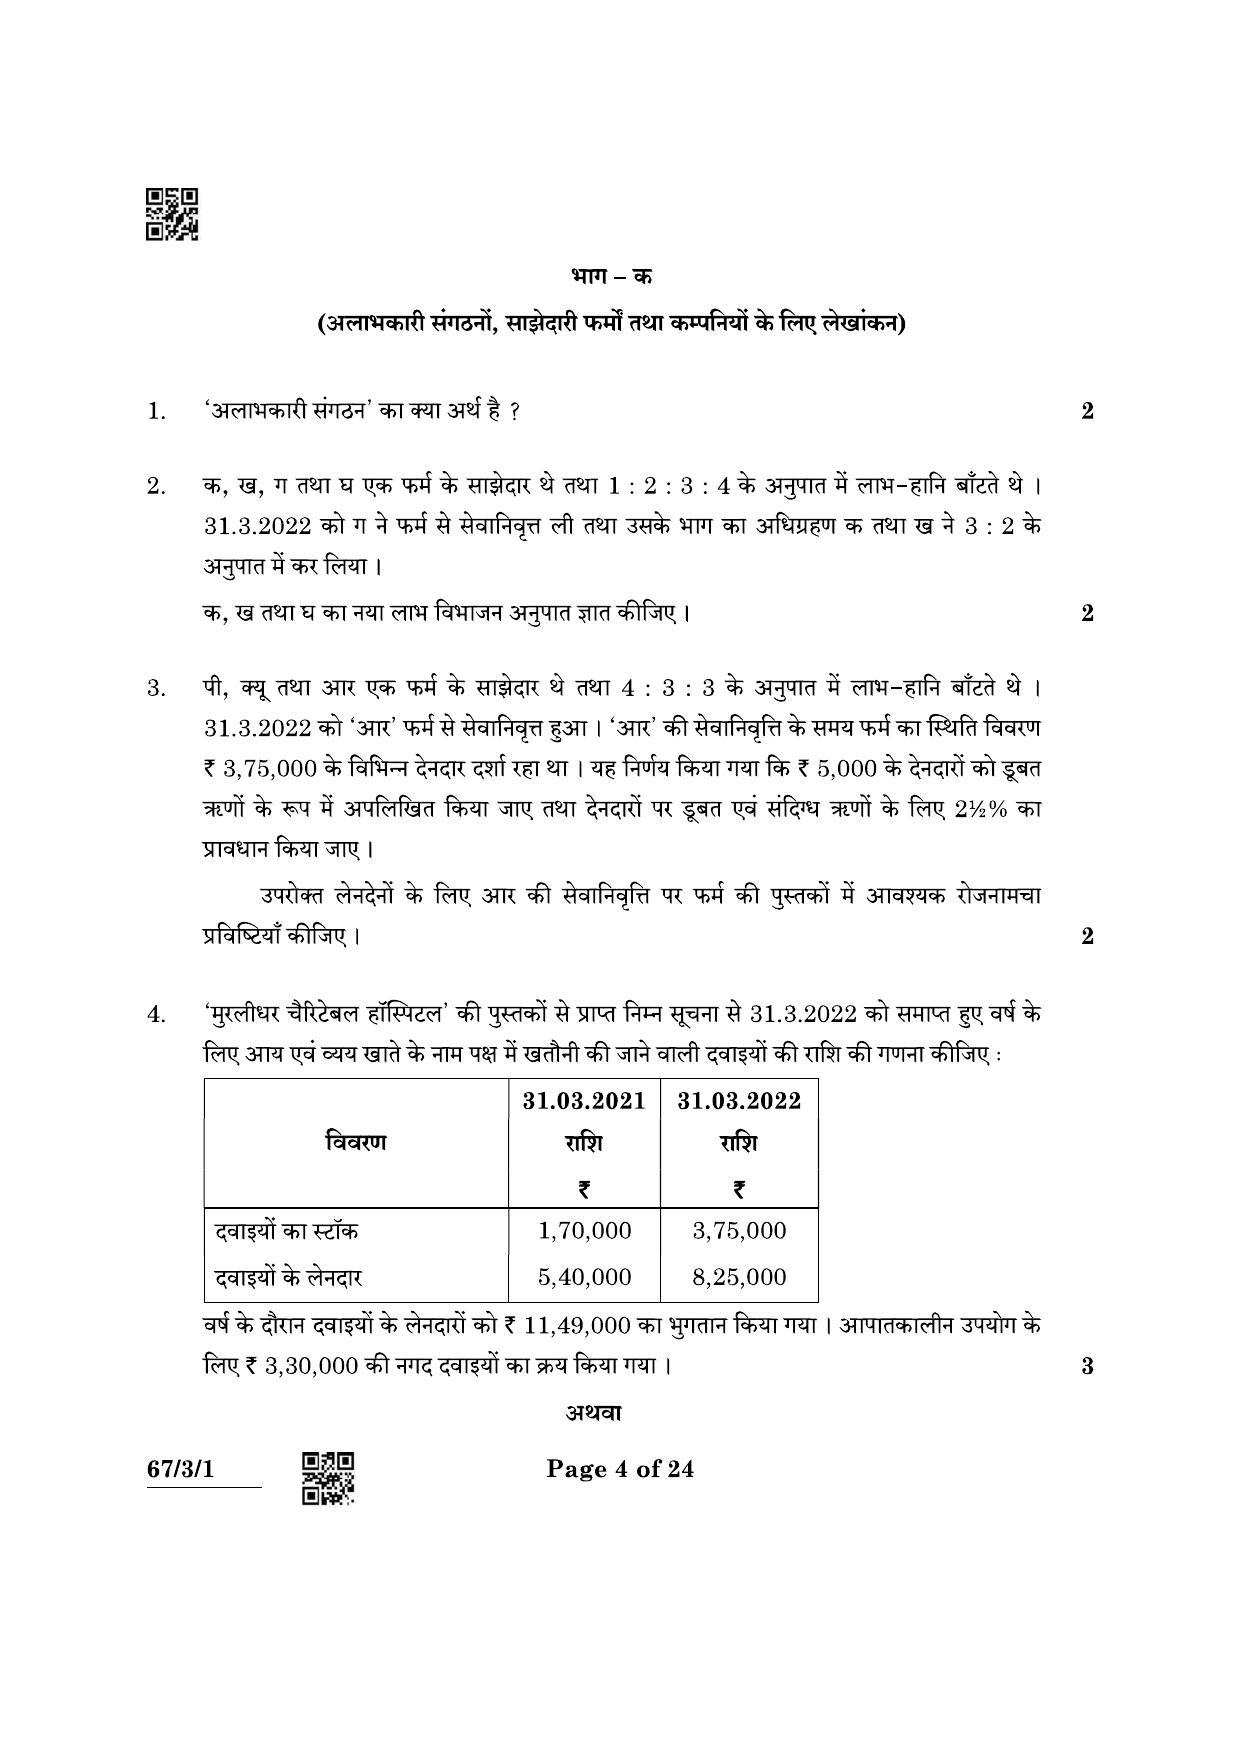 CBSE Class 12 67-3-1 Accountancy 2022 Question Paper - Page 4